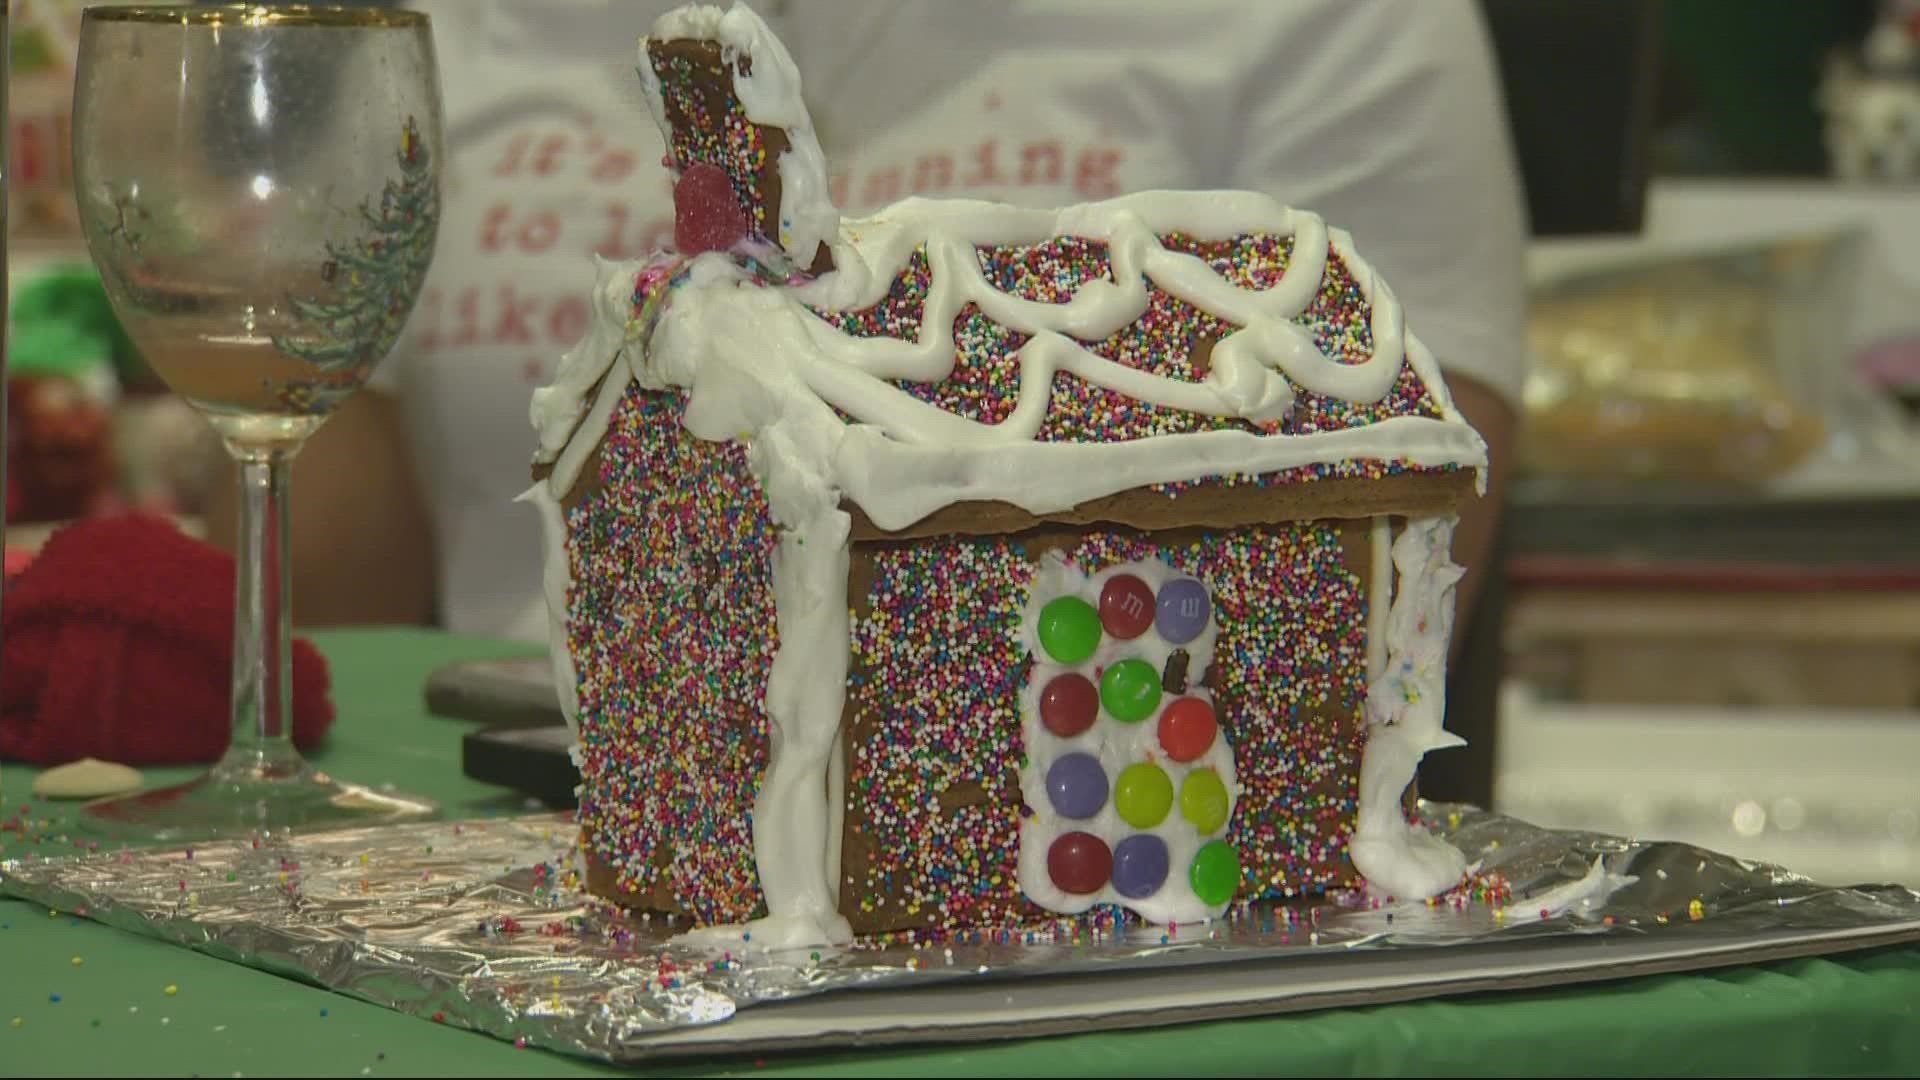 In Lyons, one woman is taking her love of decorating gingerbread houses to another level and inviting her resilient neighbors to join her.